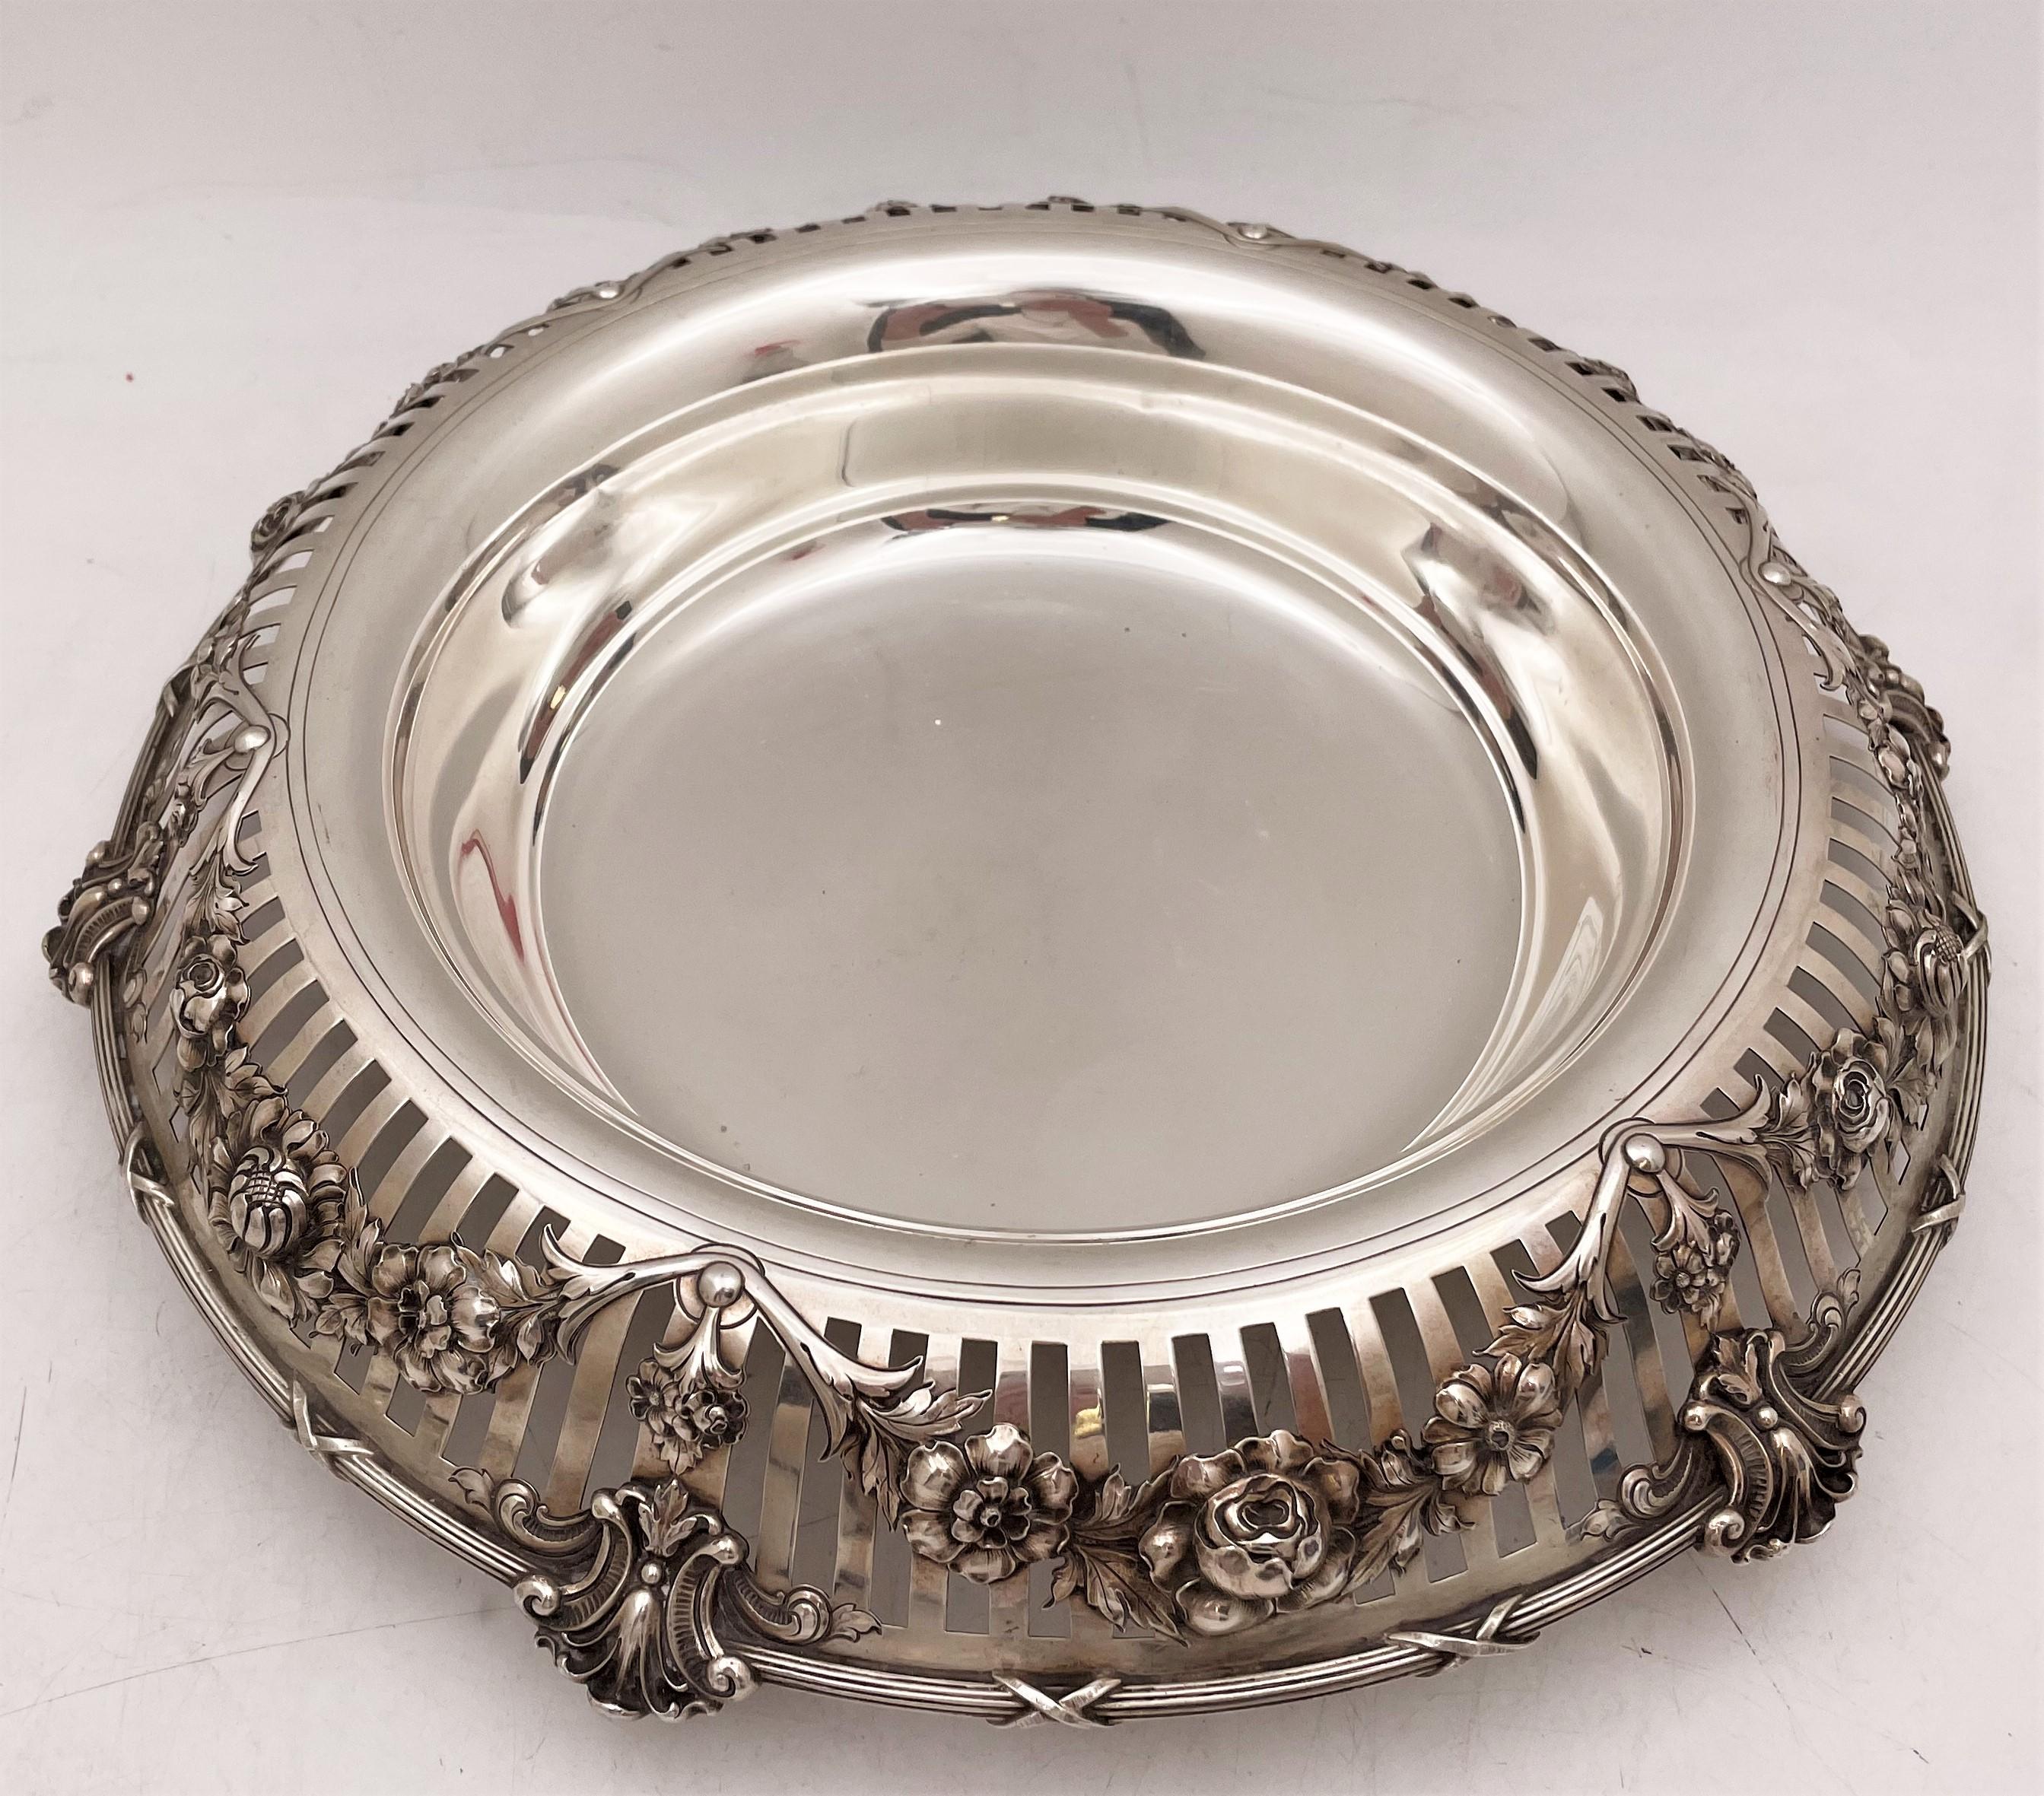 American Gorham Sterling Silver 1911 Centerpiece Bowl in Art Nouveau Style